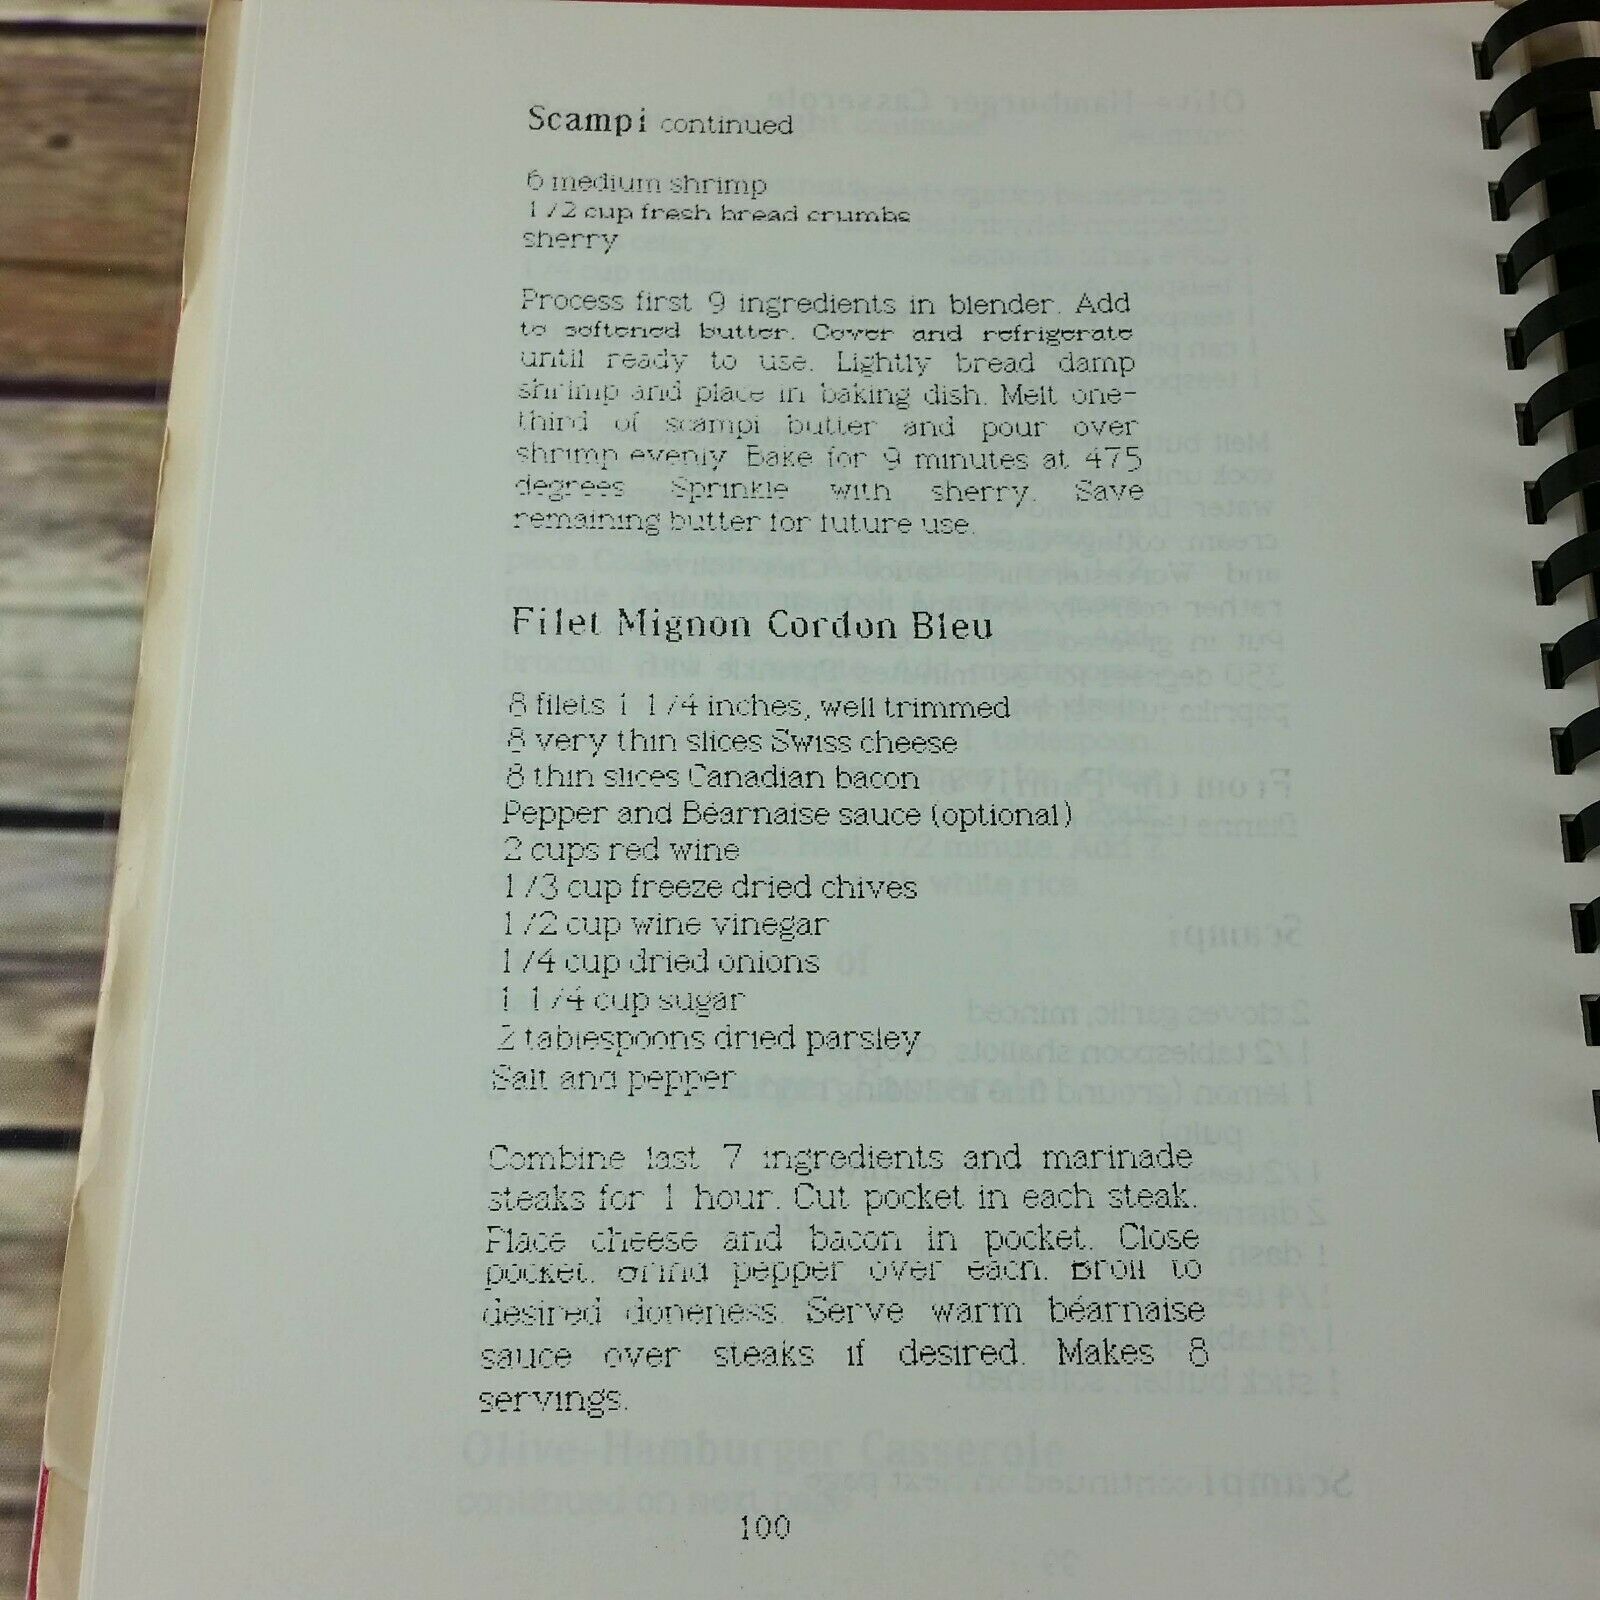 Vintage California Cookbook Cooking with the Panthers Rio Dell School 8th Grade - At Grandma's Table